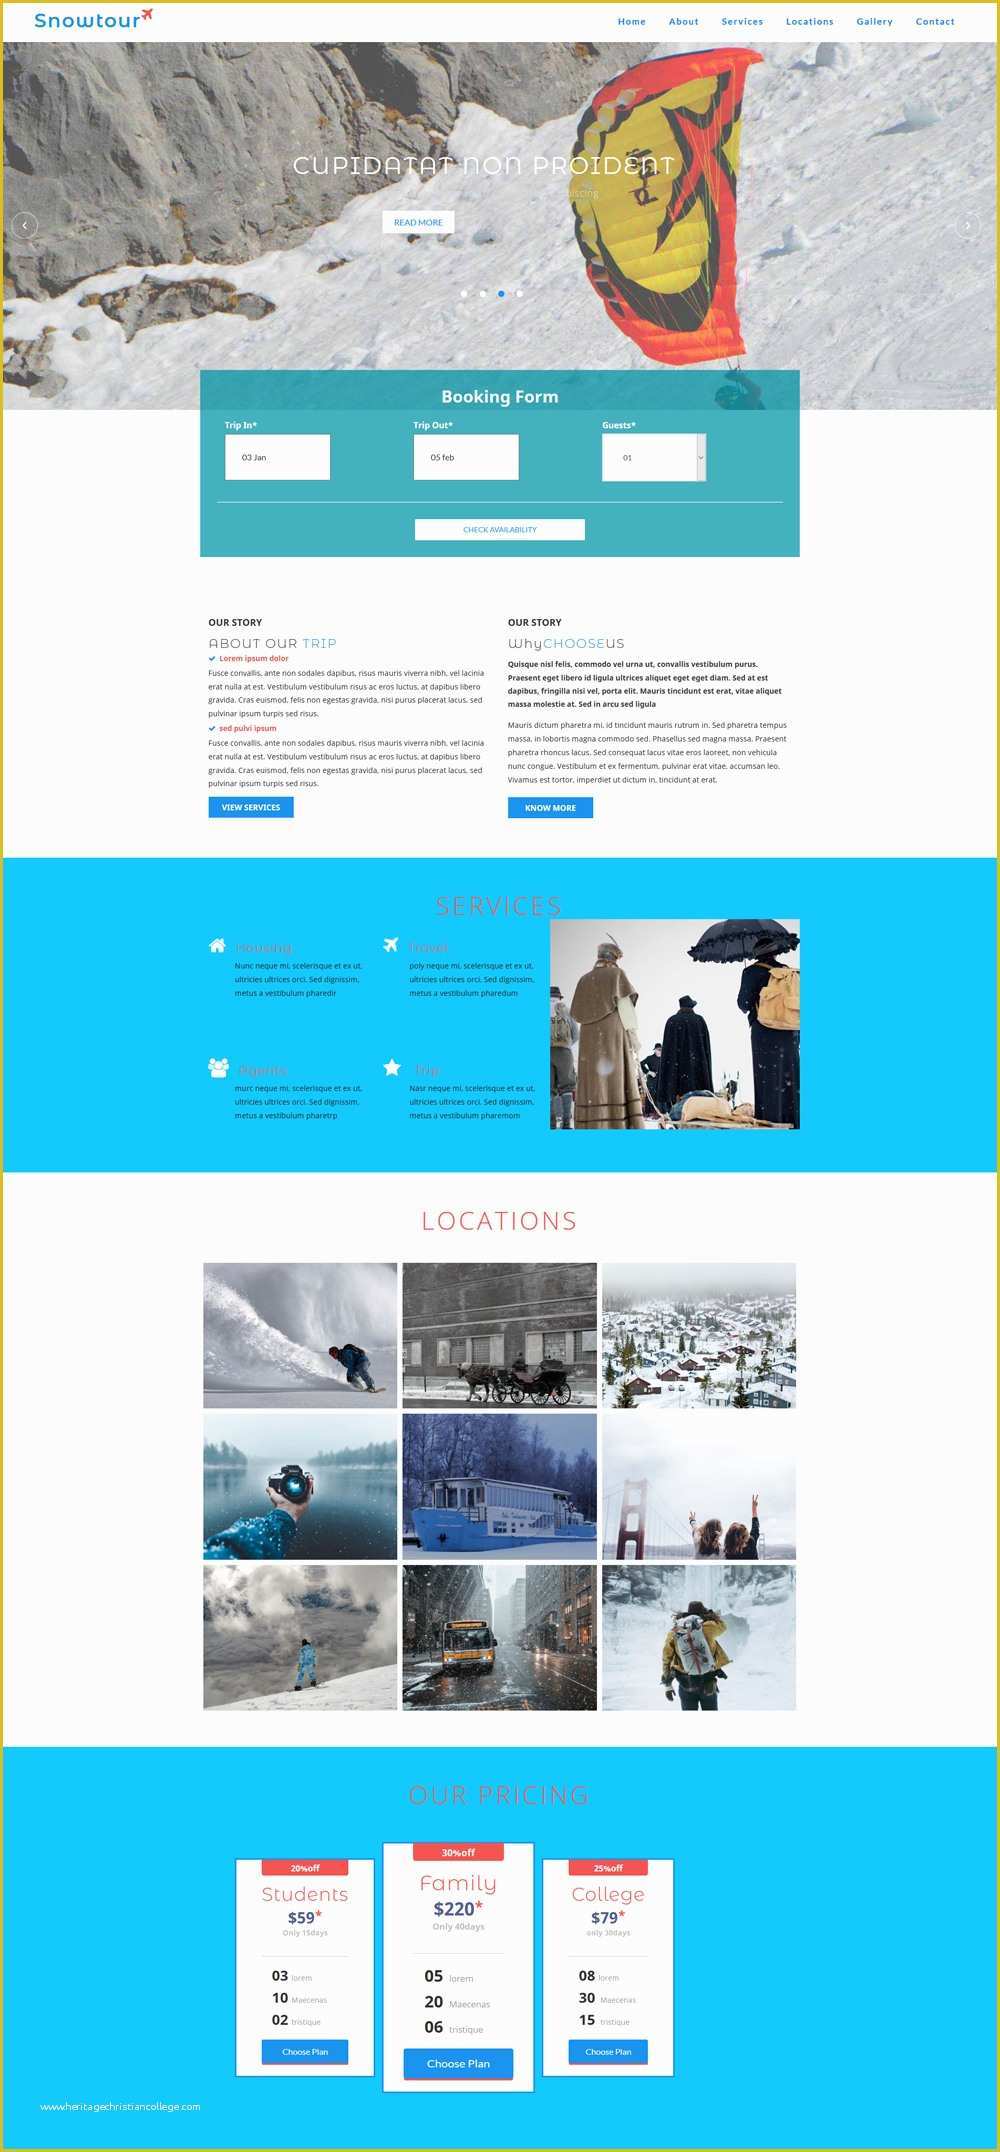 Best Website Templates Free Of 15 Best Free Travel Templates and themes